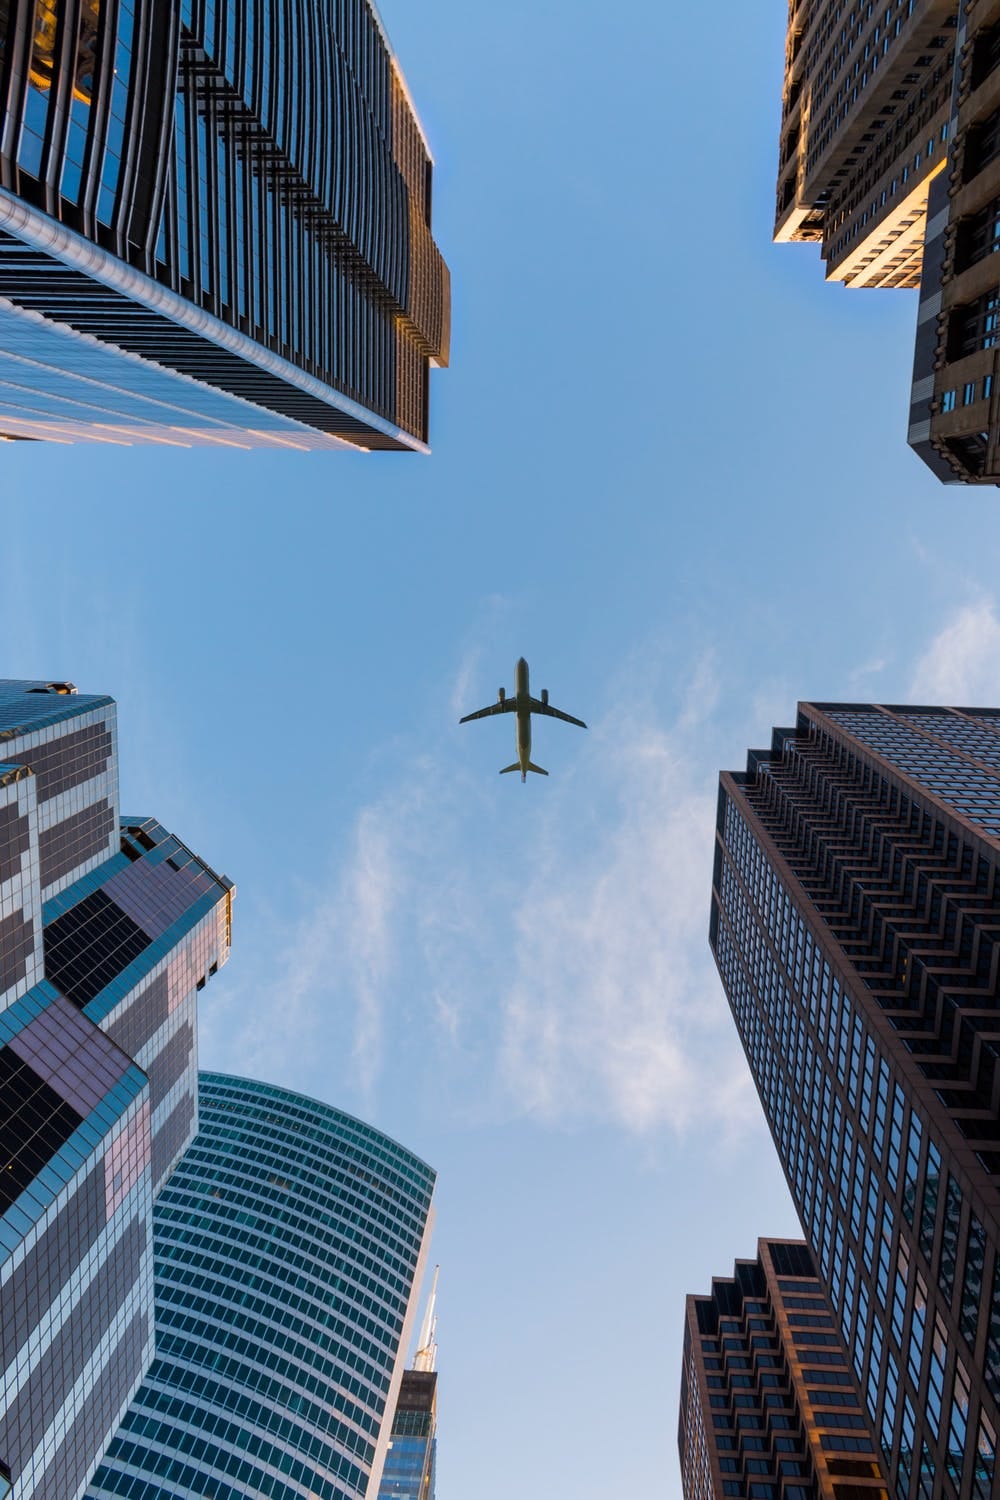 An Aeroplane flying over buildings.